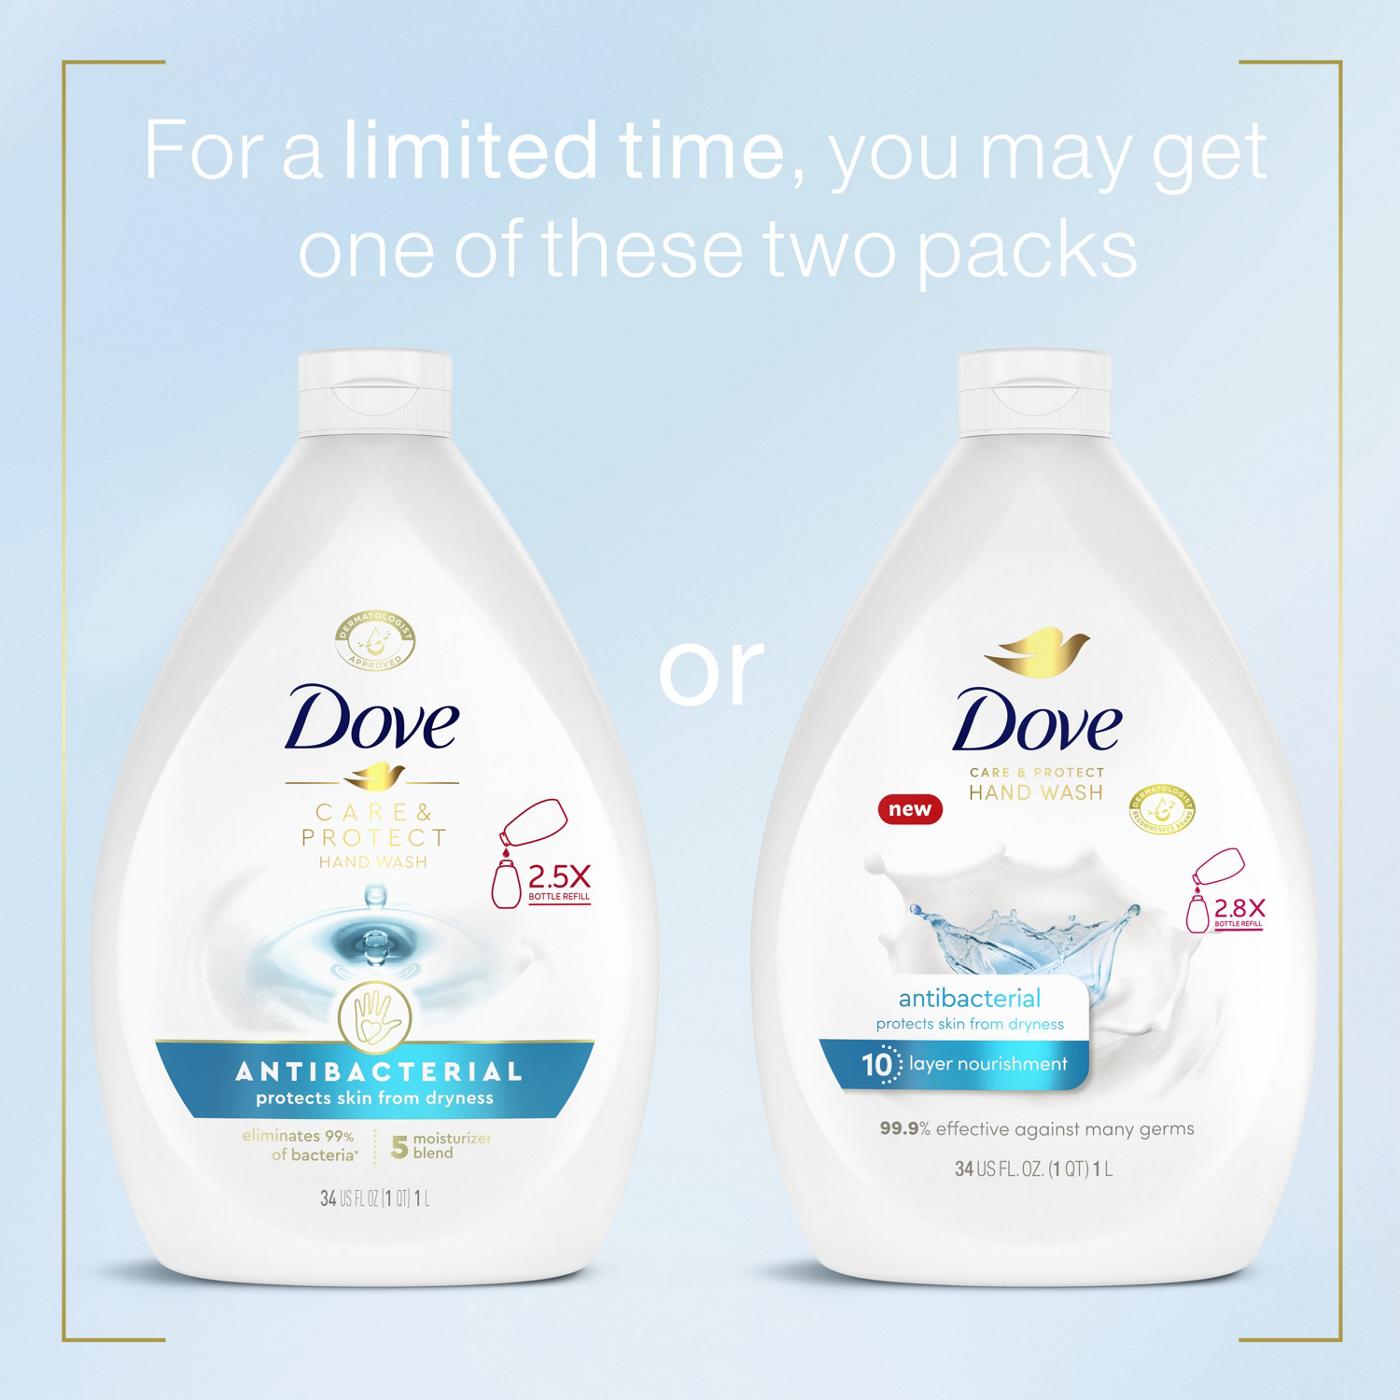 Dove Care & Protect Antibacterial Hand Wash More Moisturizers; image 6 of 8